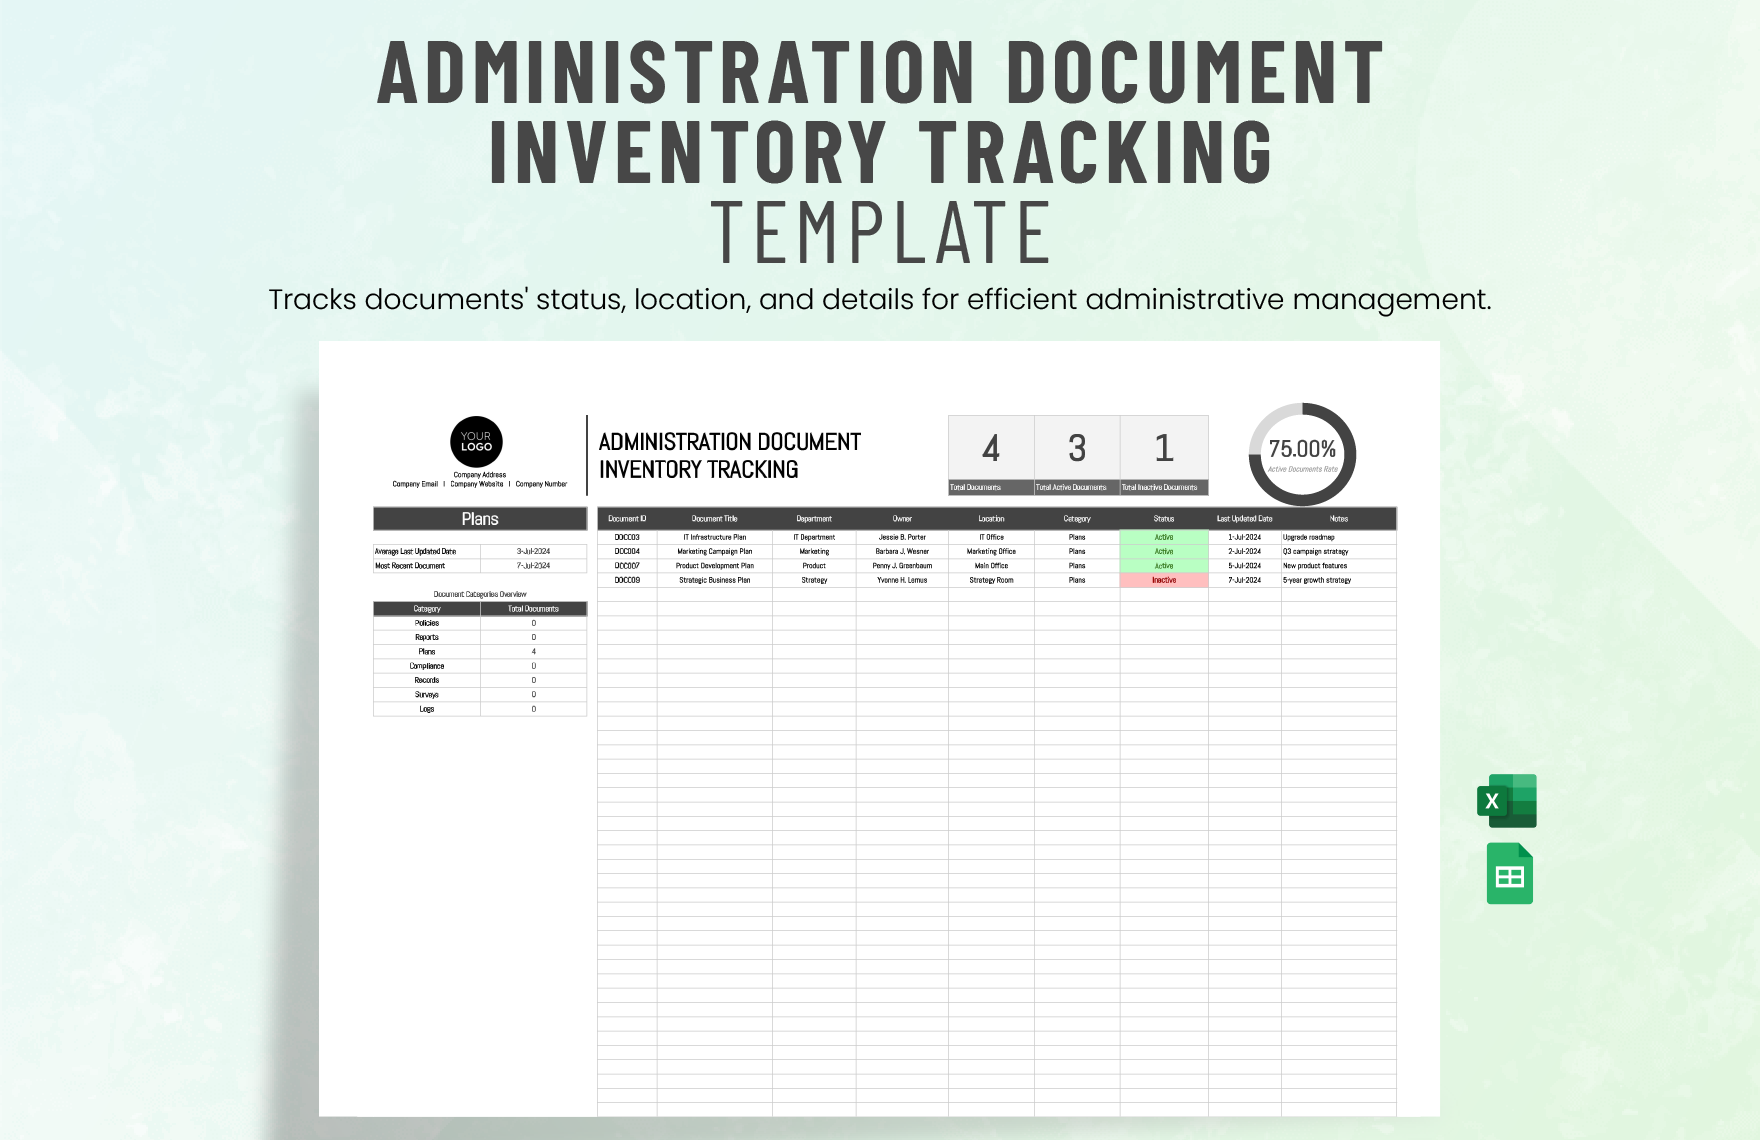 Administration Document Inventory Tracking Template in Excel, Google Sheets